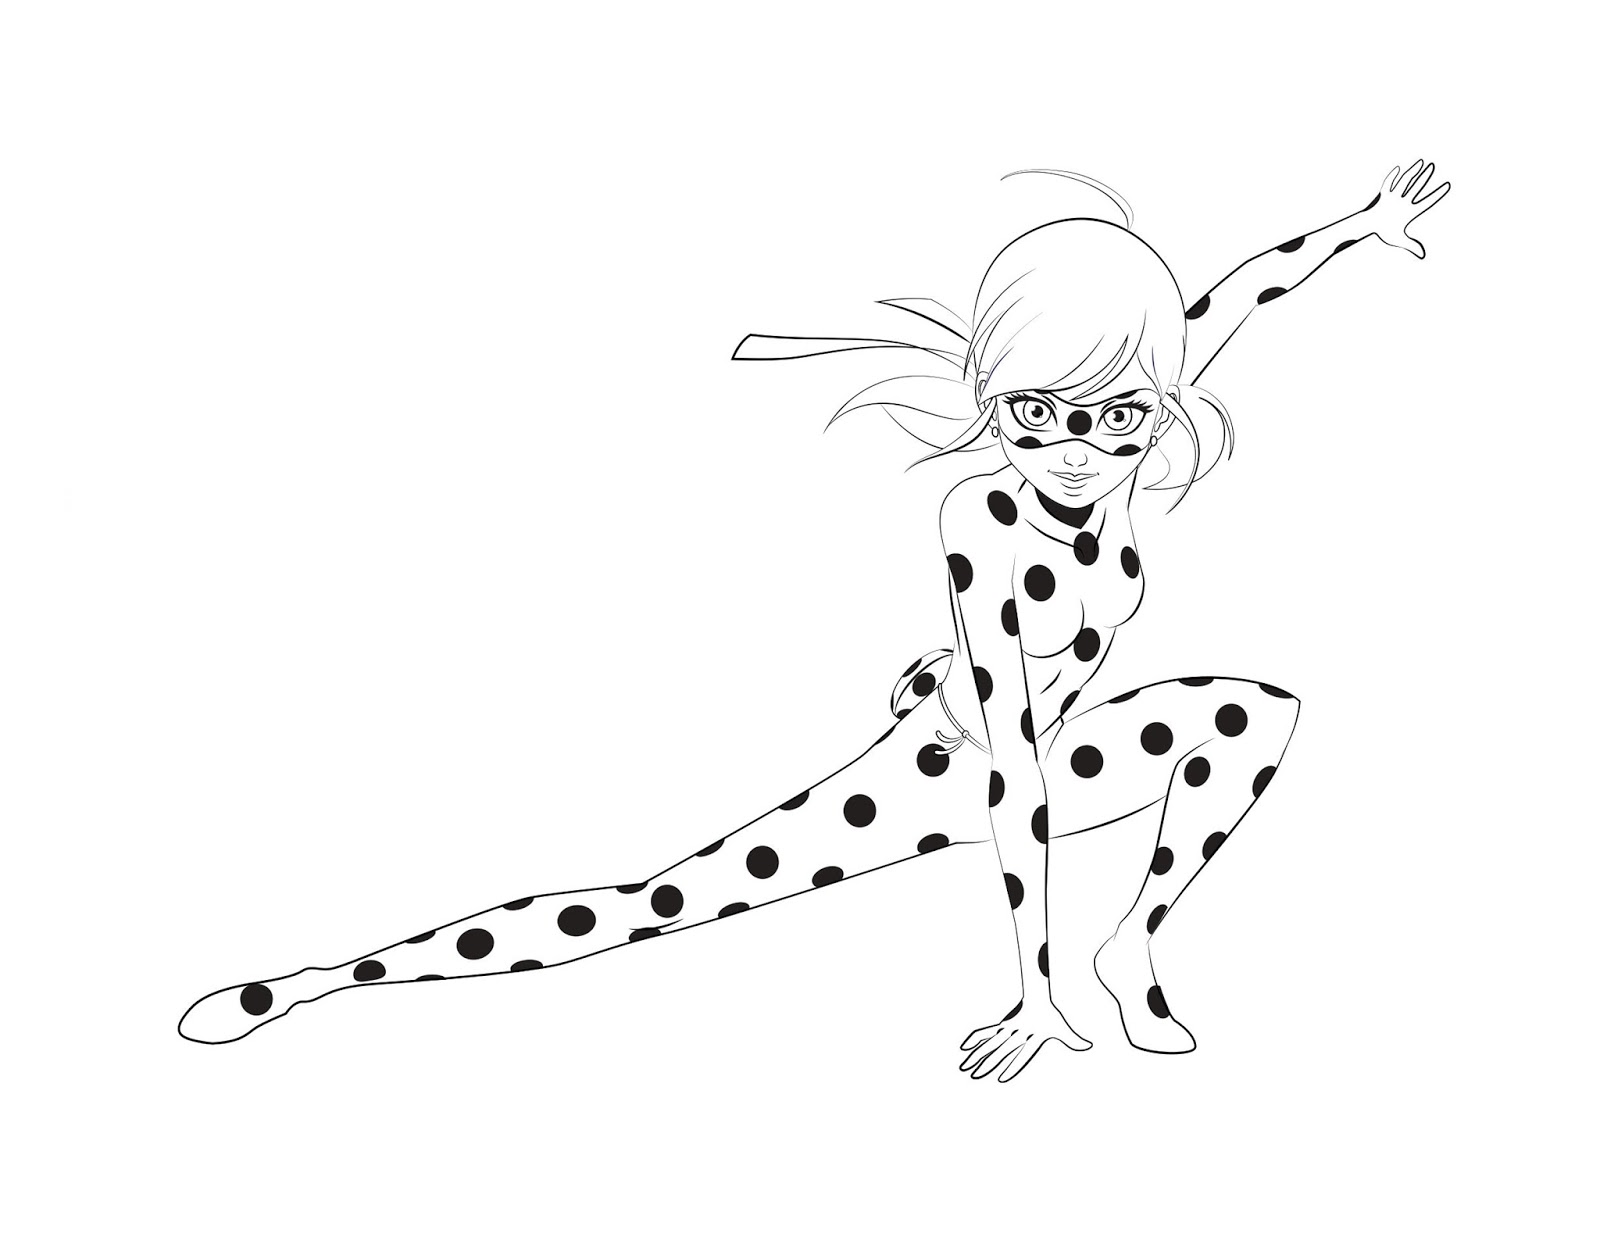 Miraculous Ladybug coloring pages - YouLoveIt.com